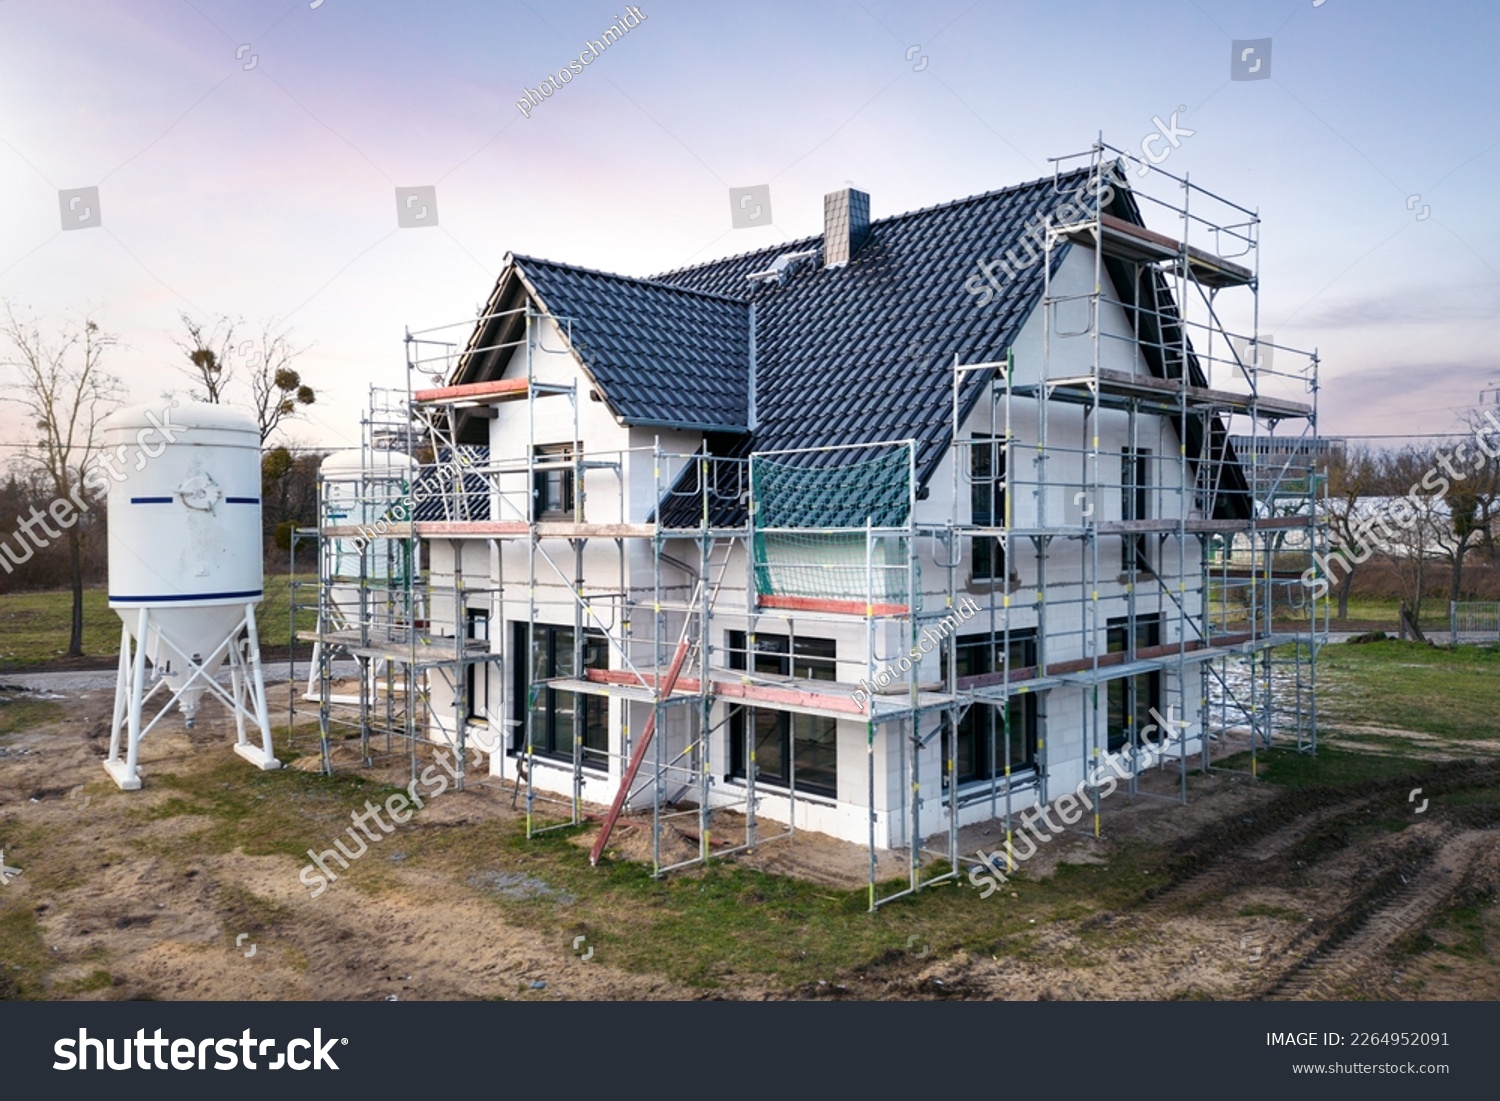 Construction site of a single-family house in Germany #2264952091